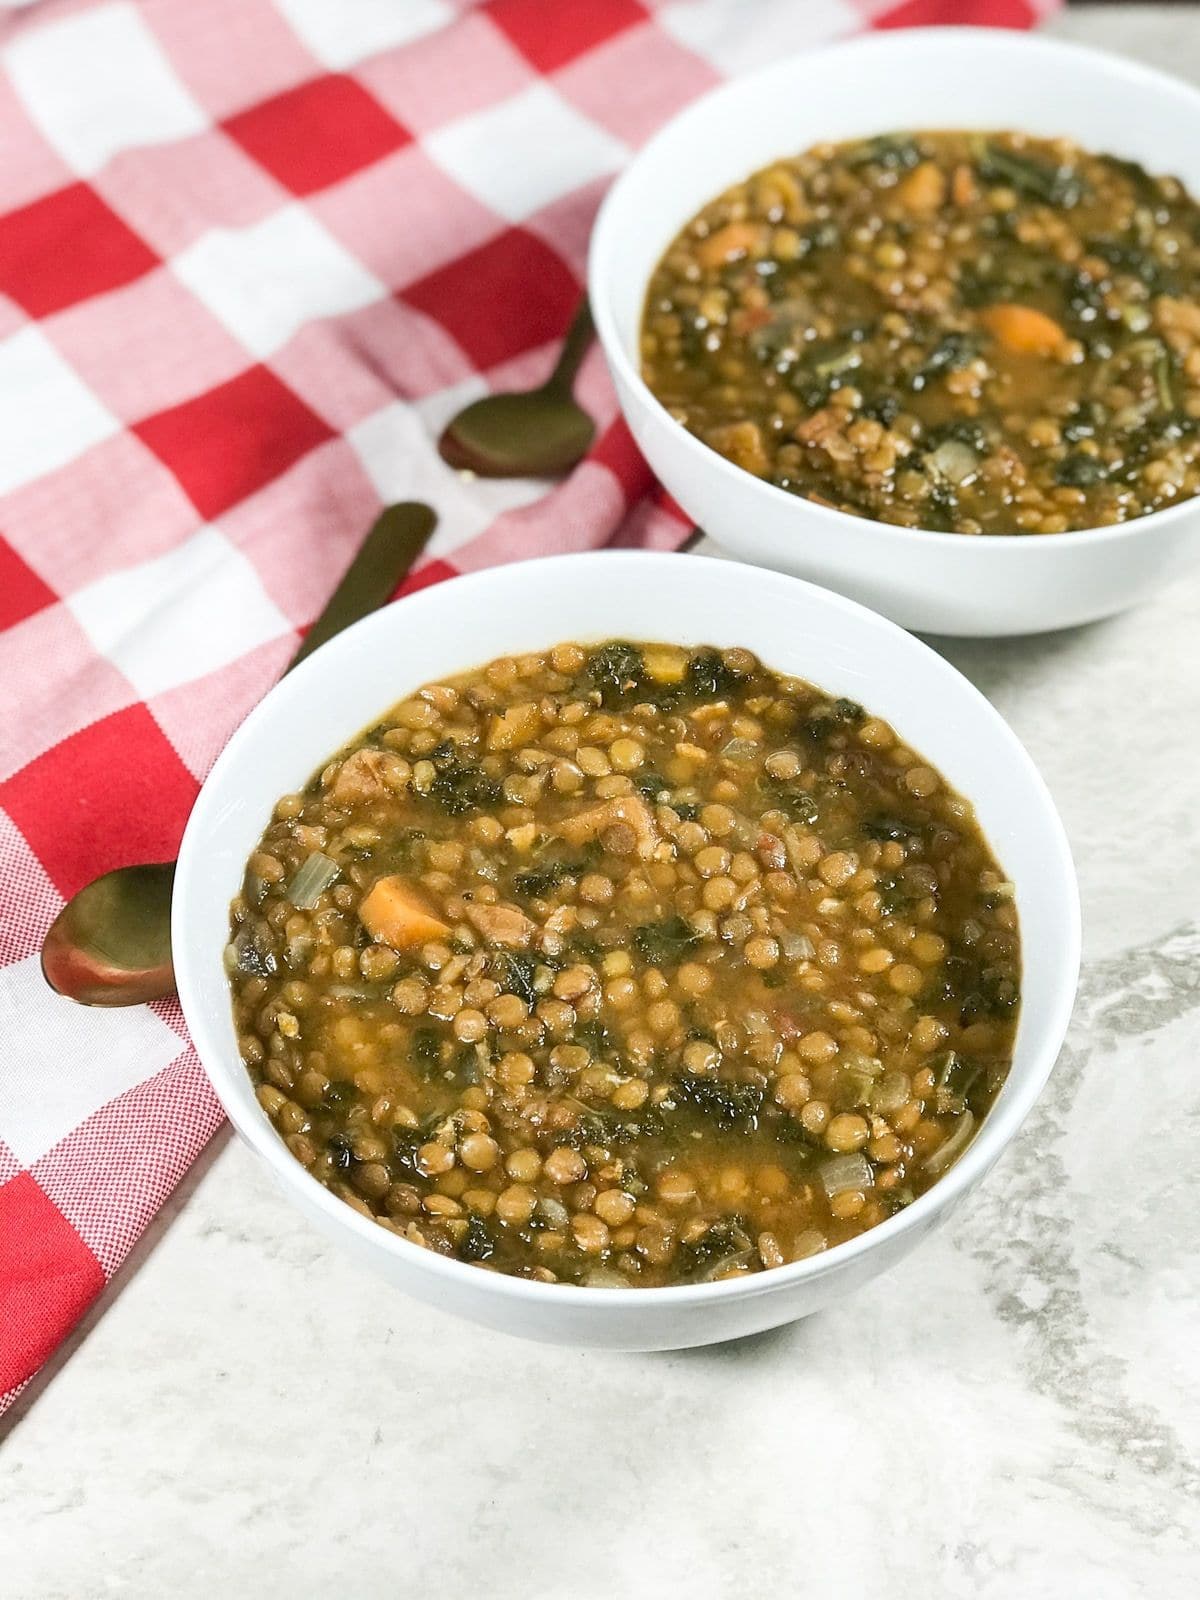 A bowl is filled with lentil soup is on the table